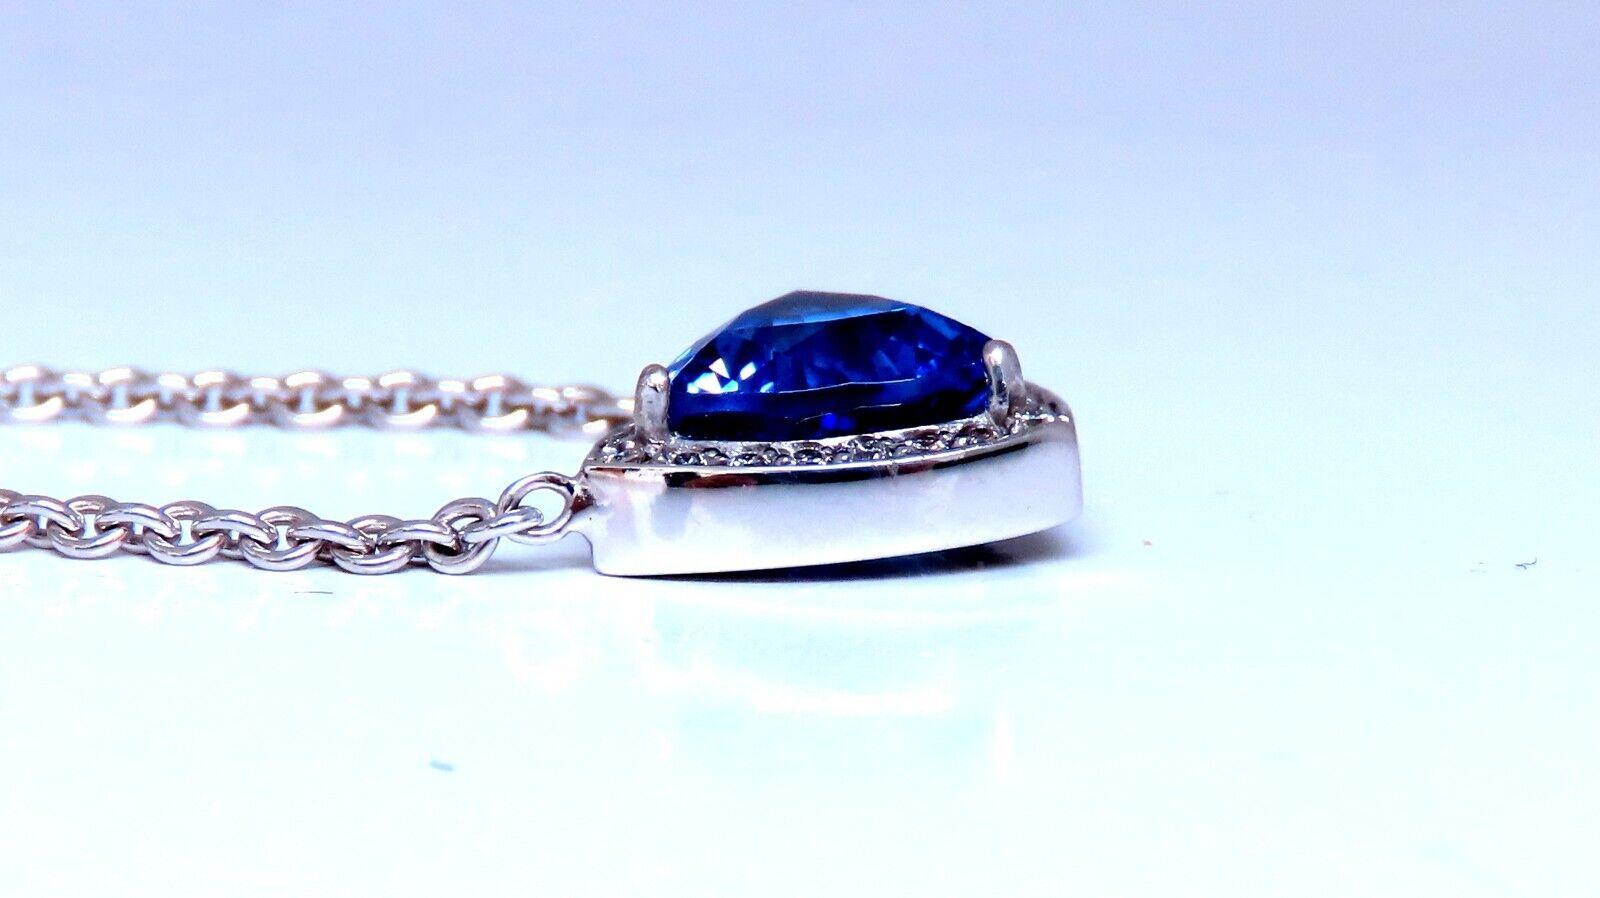 2.15ct. Natural Tanzanite Necklace

VS clean clarity

Brilliant Heart cut

8 x 8mm

Overall Pendant Measurement: 11mm

.30ct diamonds H/vs2

14kt. white gold & necklace

16 inches long.

Grand weight: 10 grams

Appraisal will accompany for: $4,000